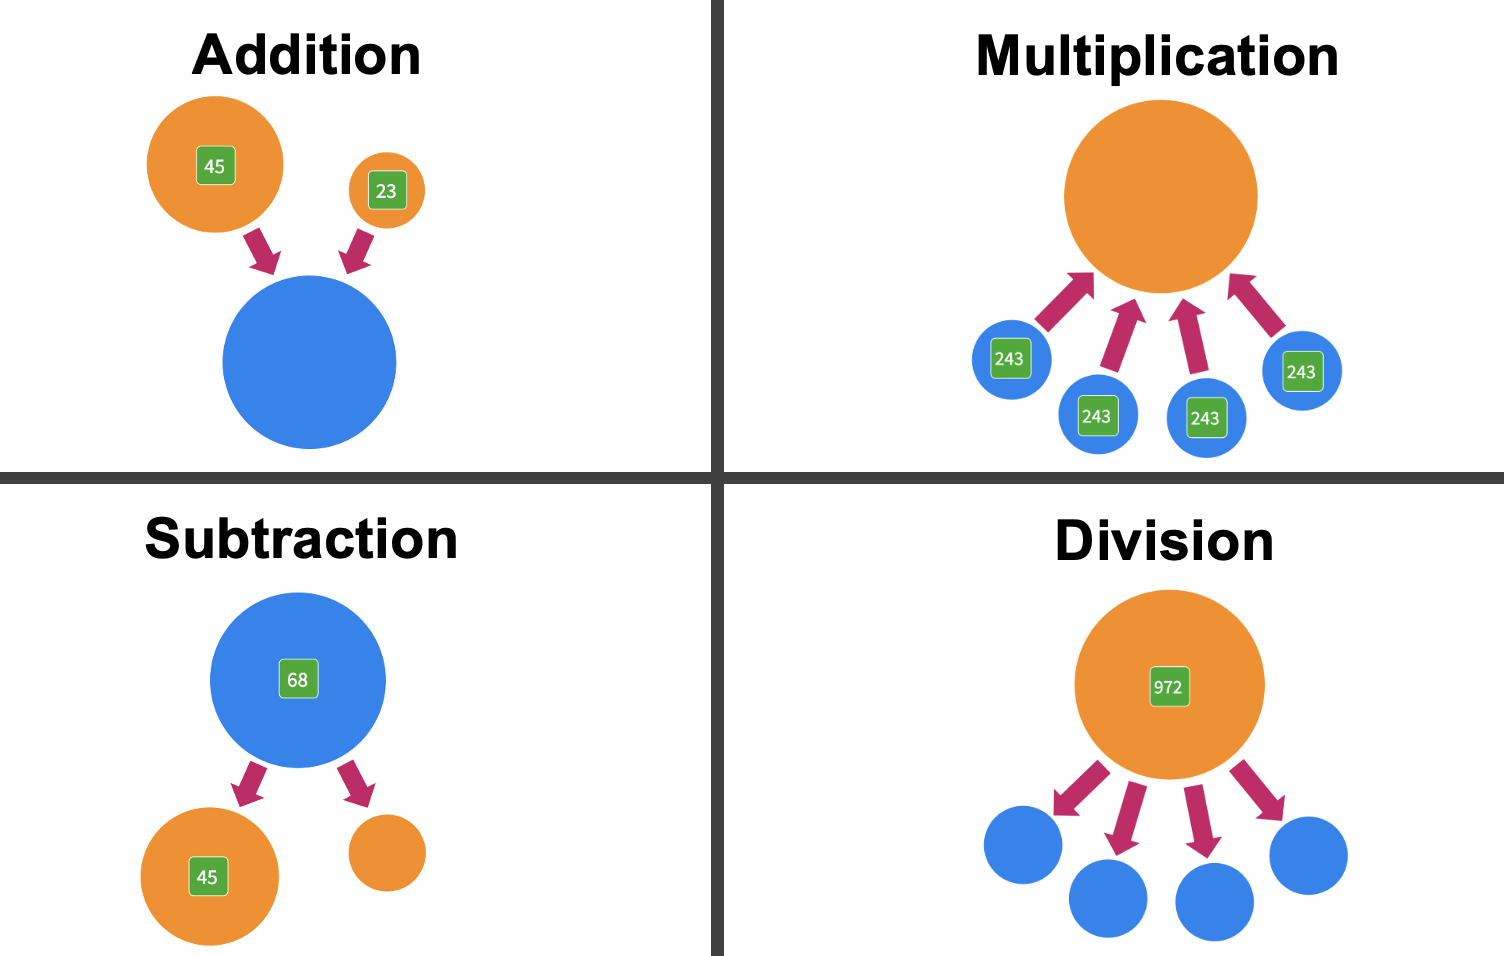 Picture shows models for addition, subtraction, multiplication, and division